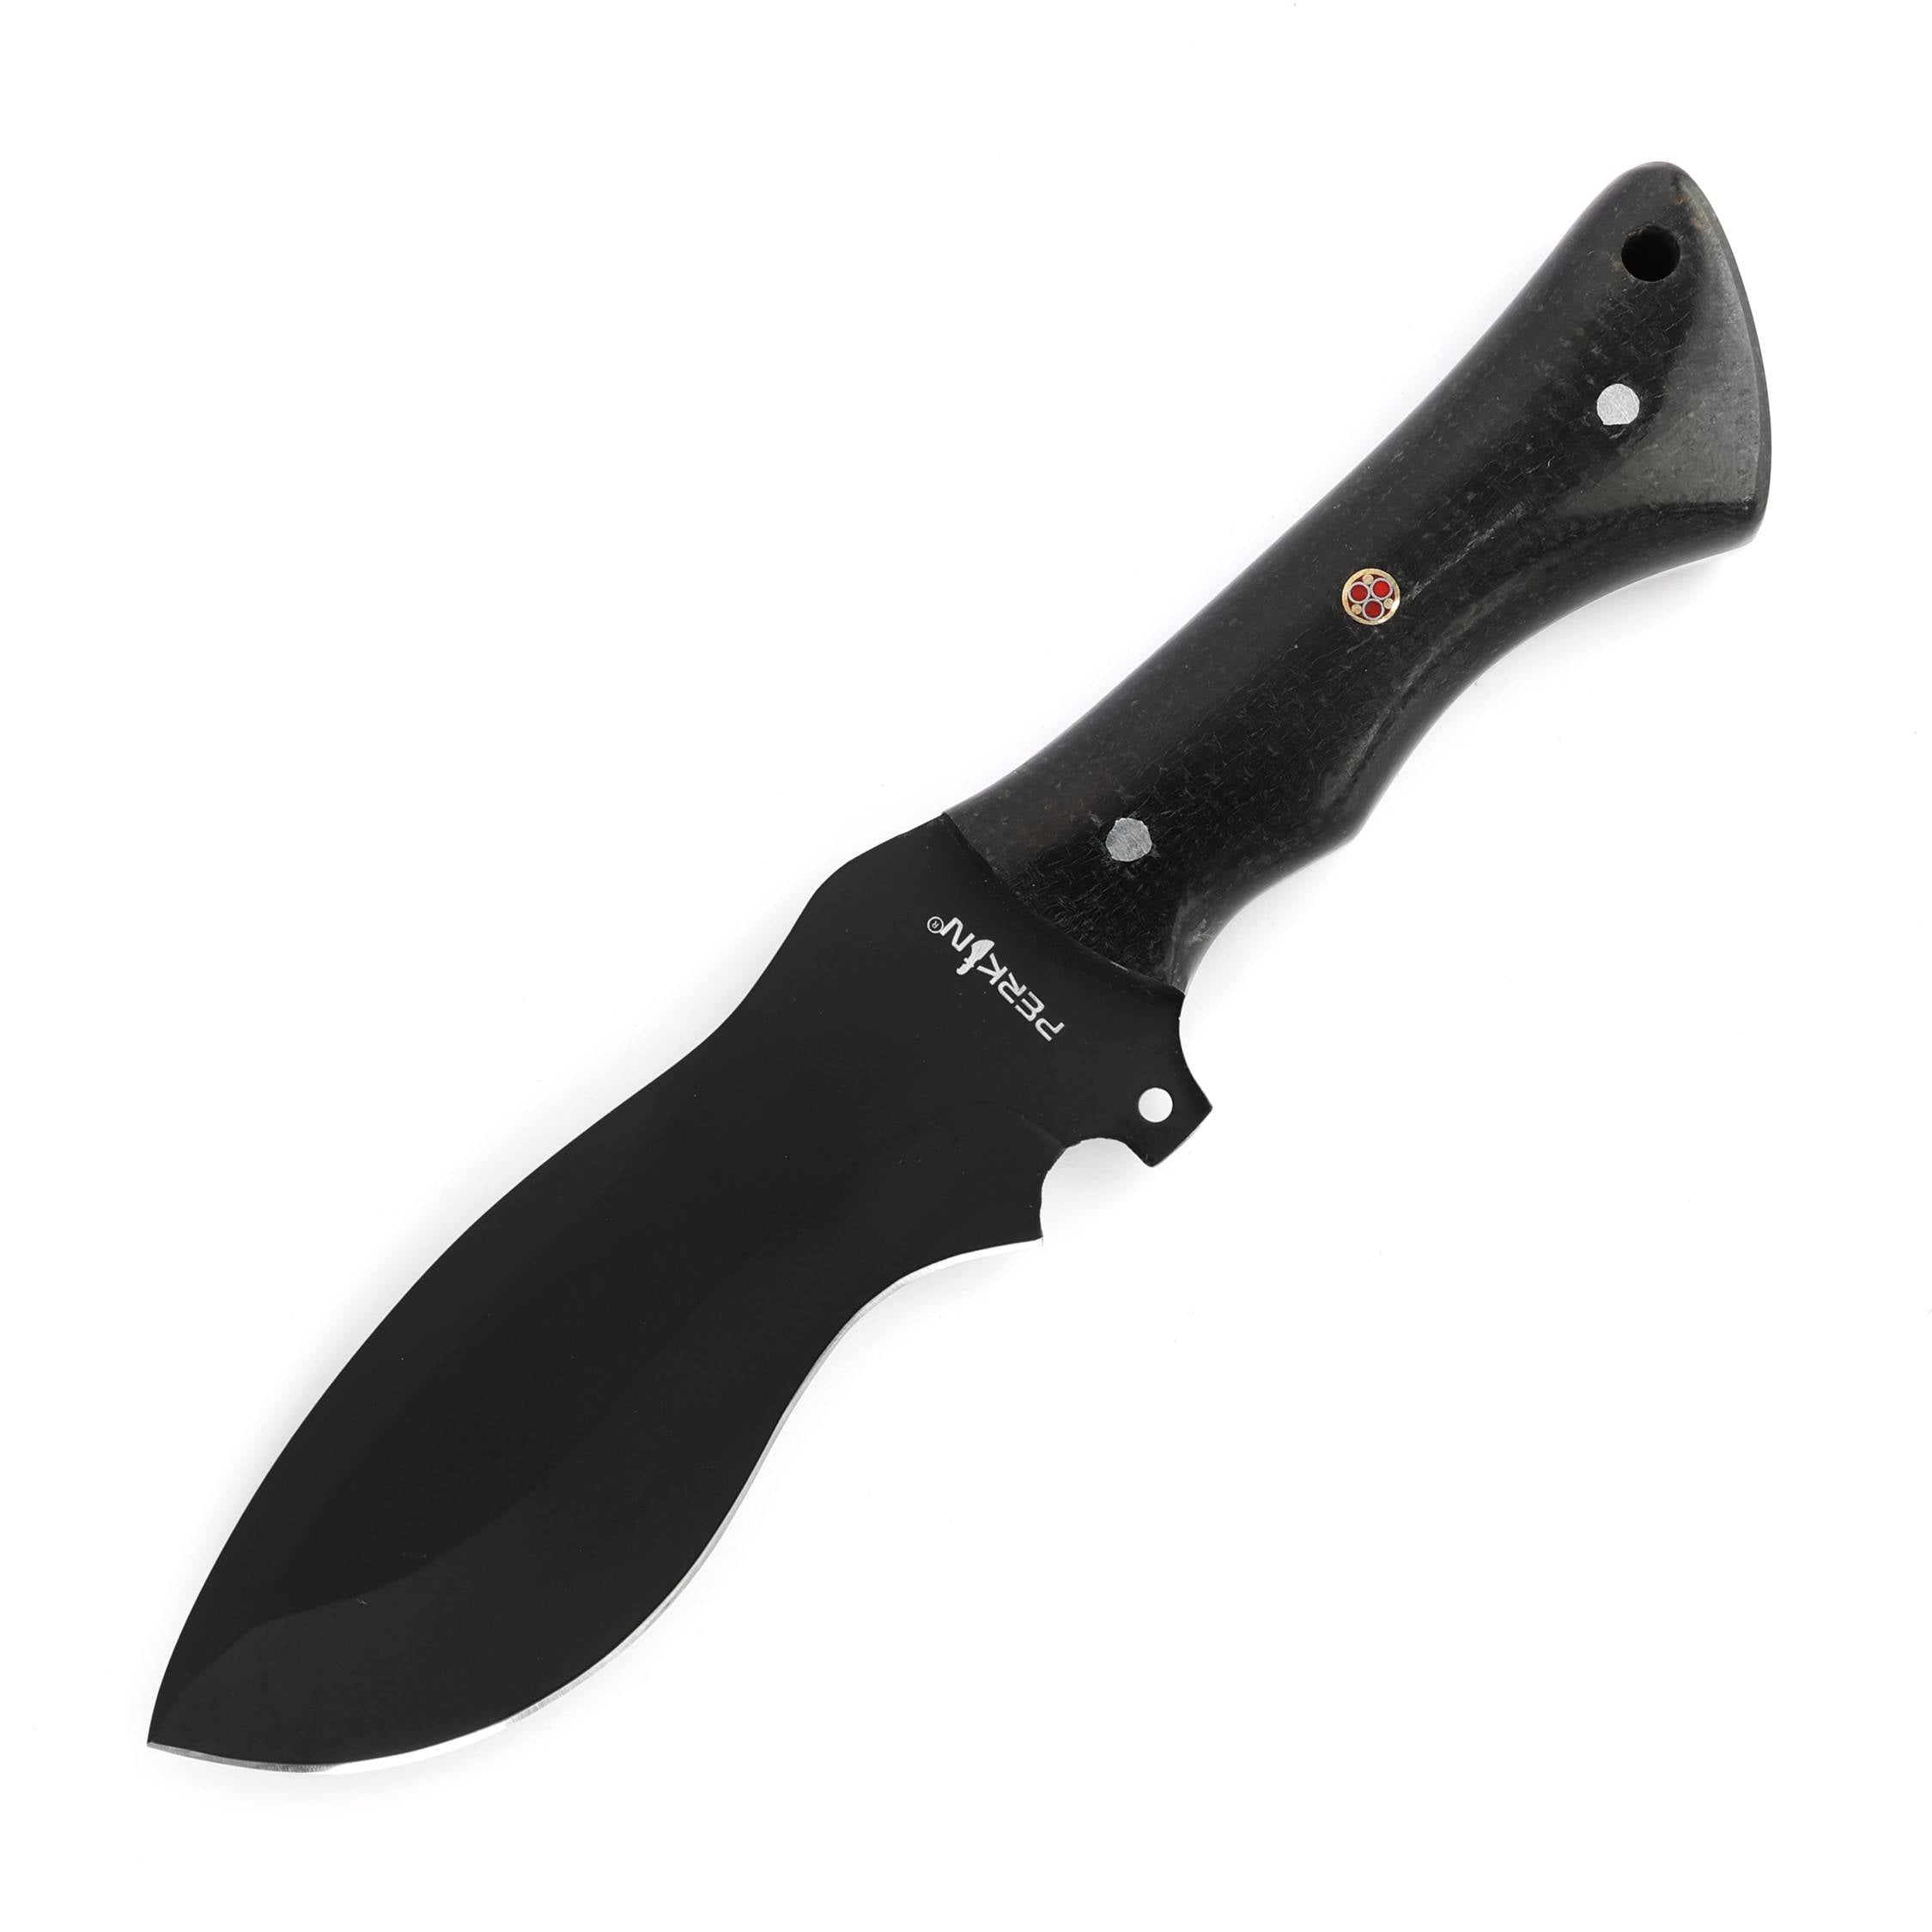 Perkin Hunting Knife With with Leather Sheath Tracker Knife Full Tang Fixed Blade Knife - BLK Tracker